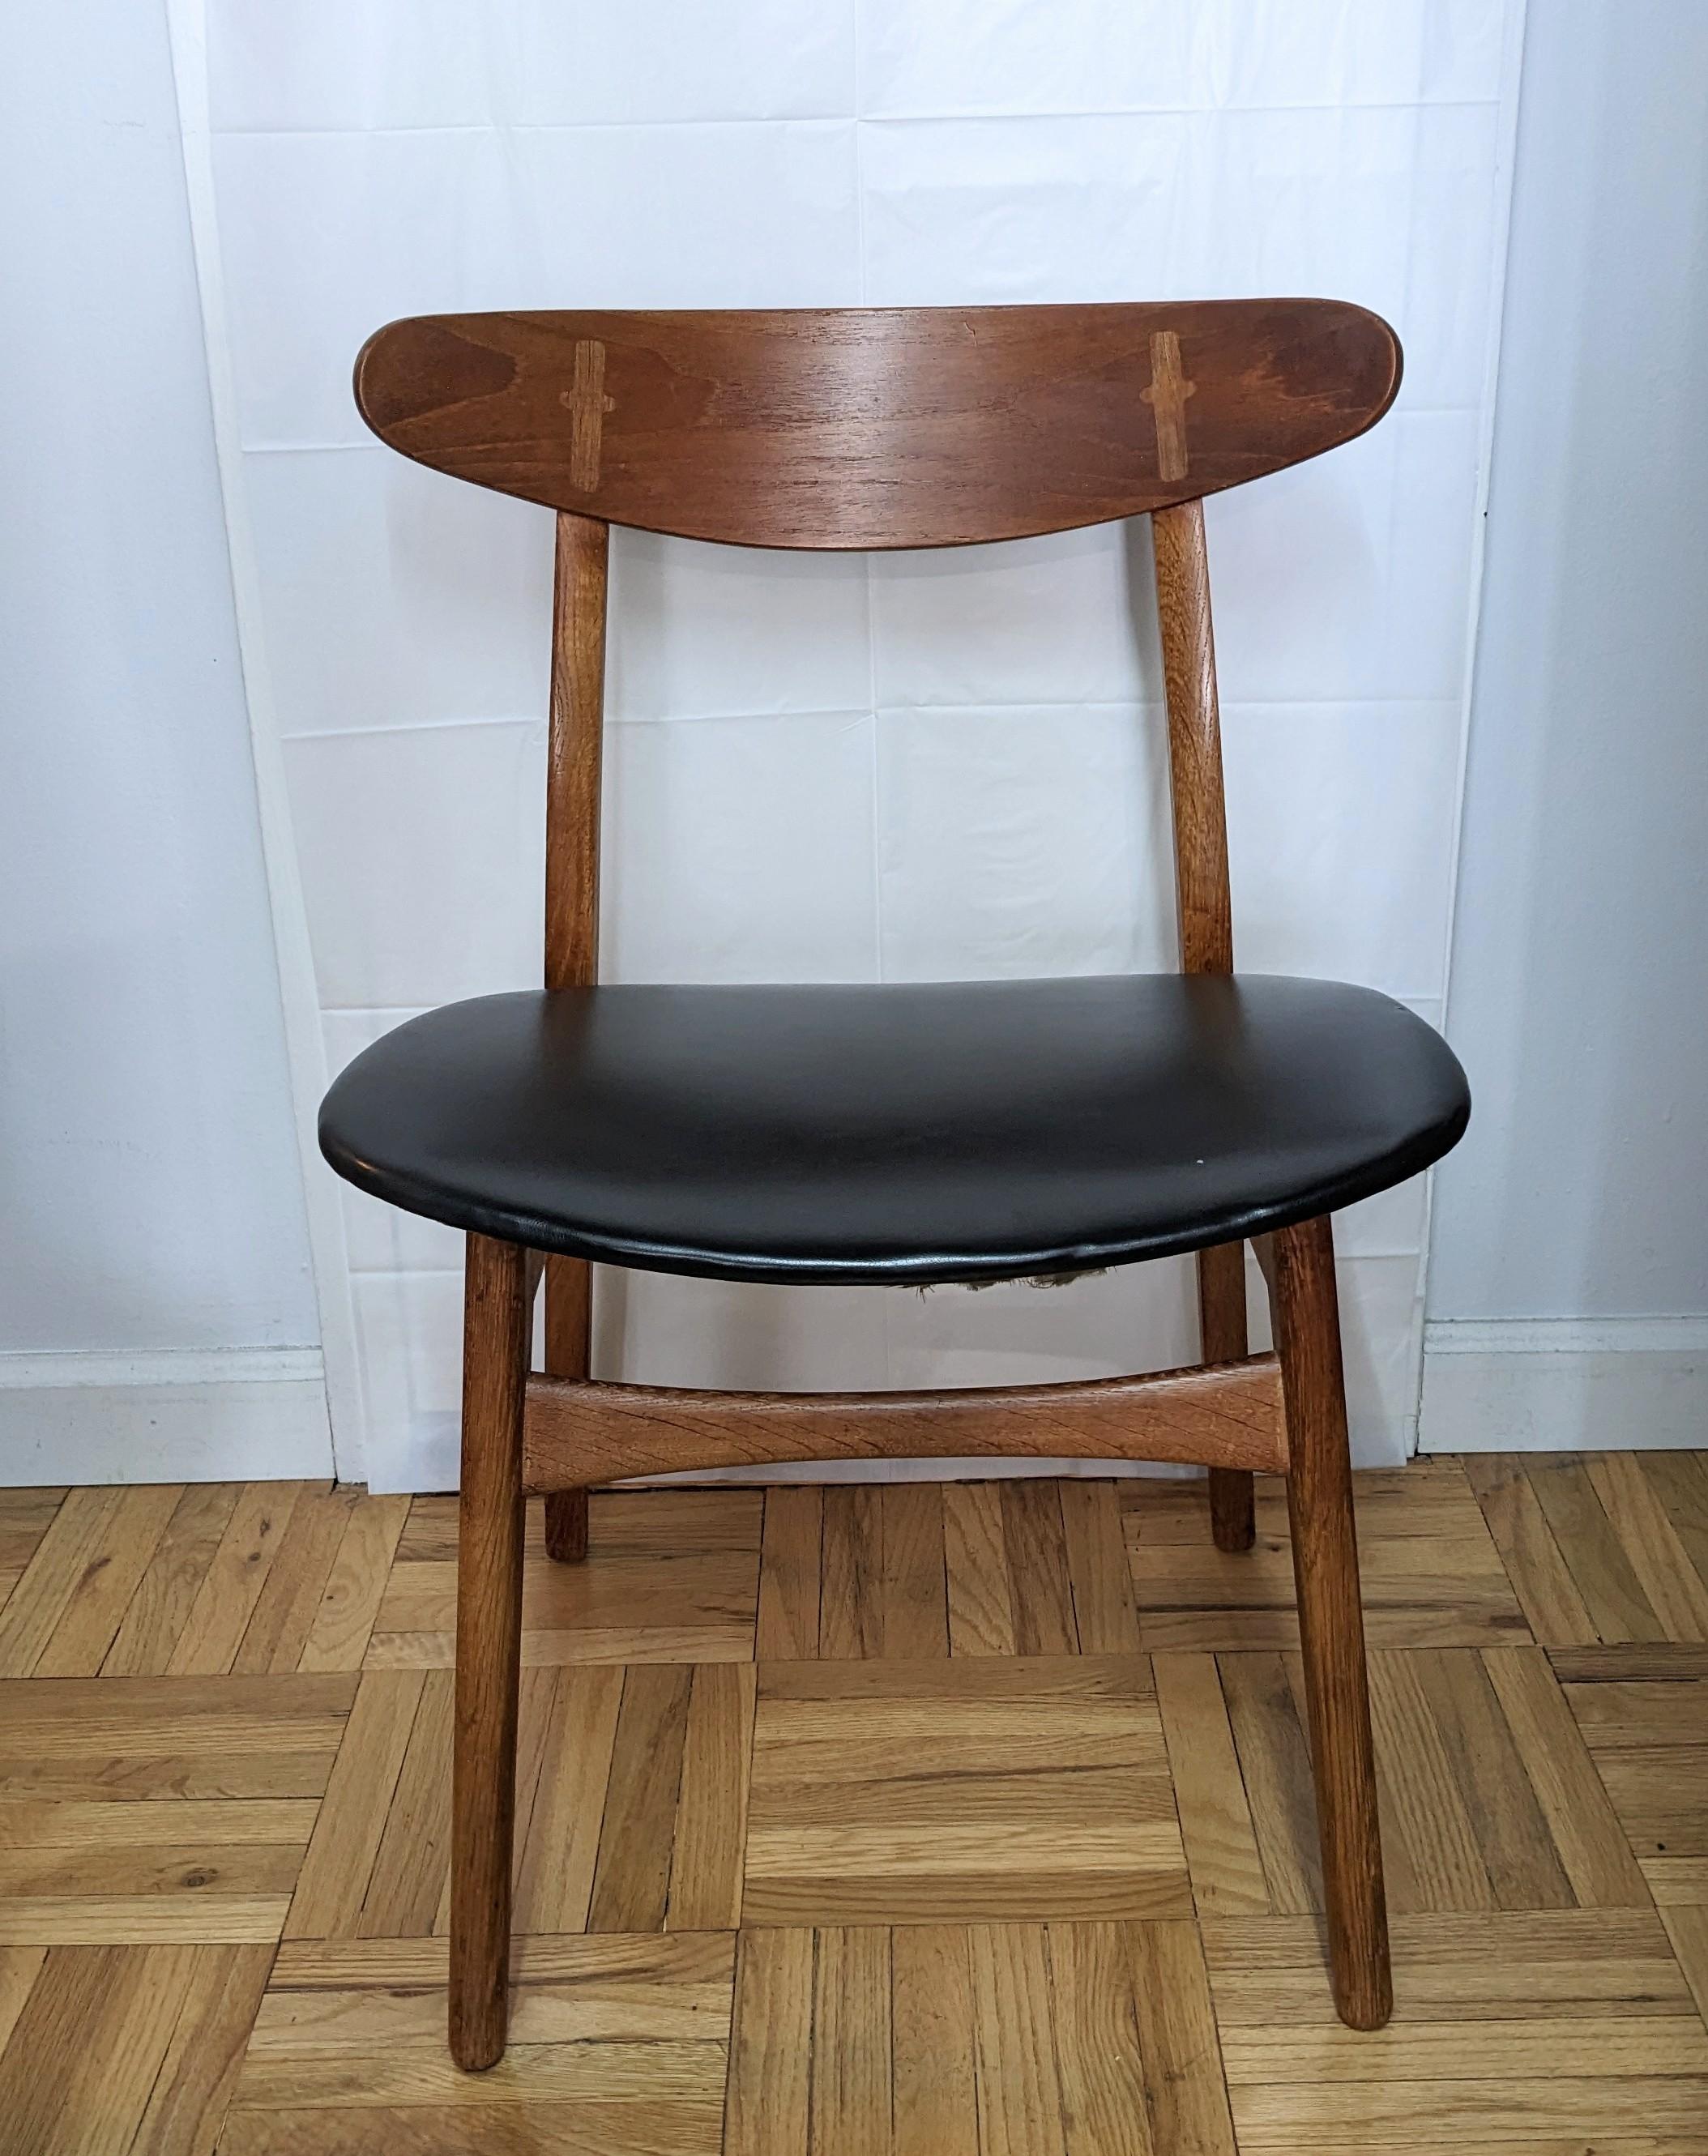 Hans Wegner CH30 Chair is an elegant dining table chair / desk chair with original black leatherette by Hans J. Wegner for Carl Hansen & Søn designed in 1954. This particular example dates from the 1960's.